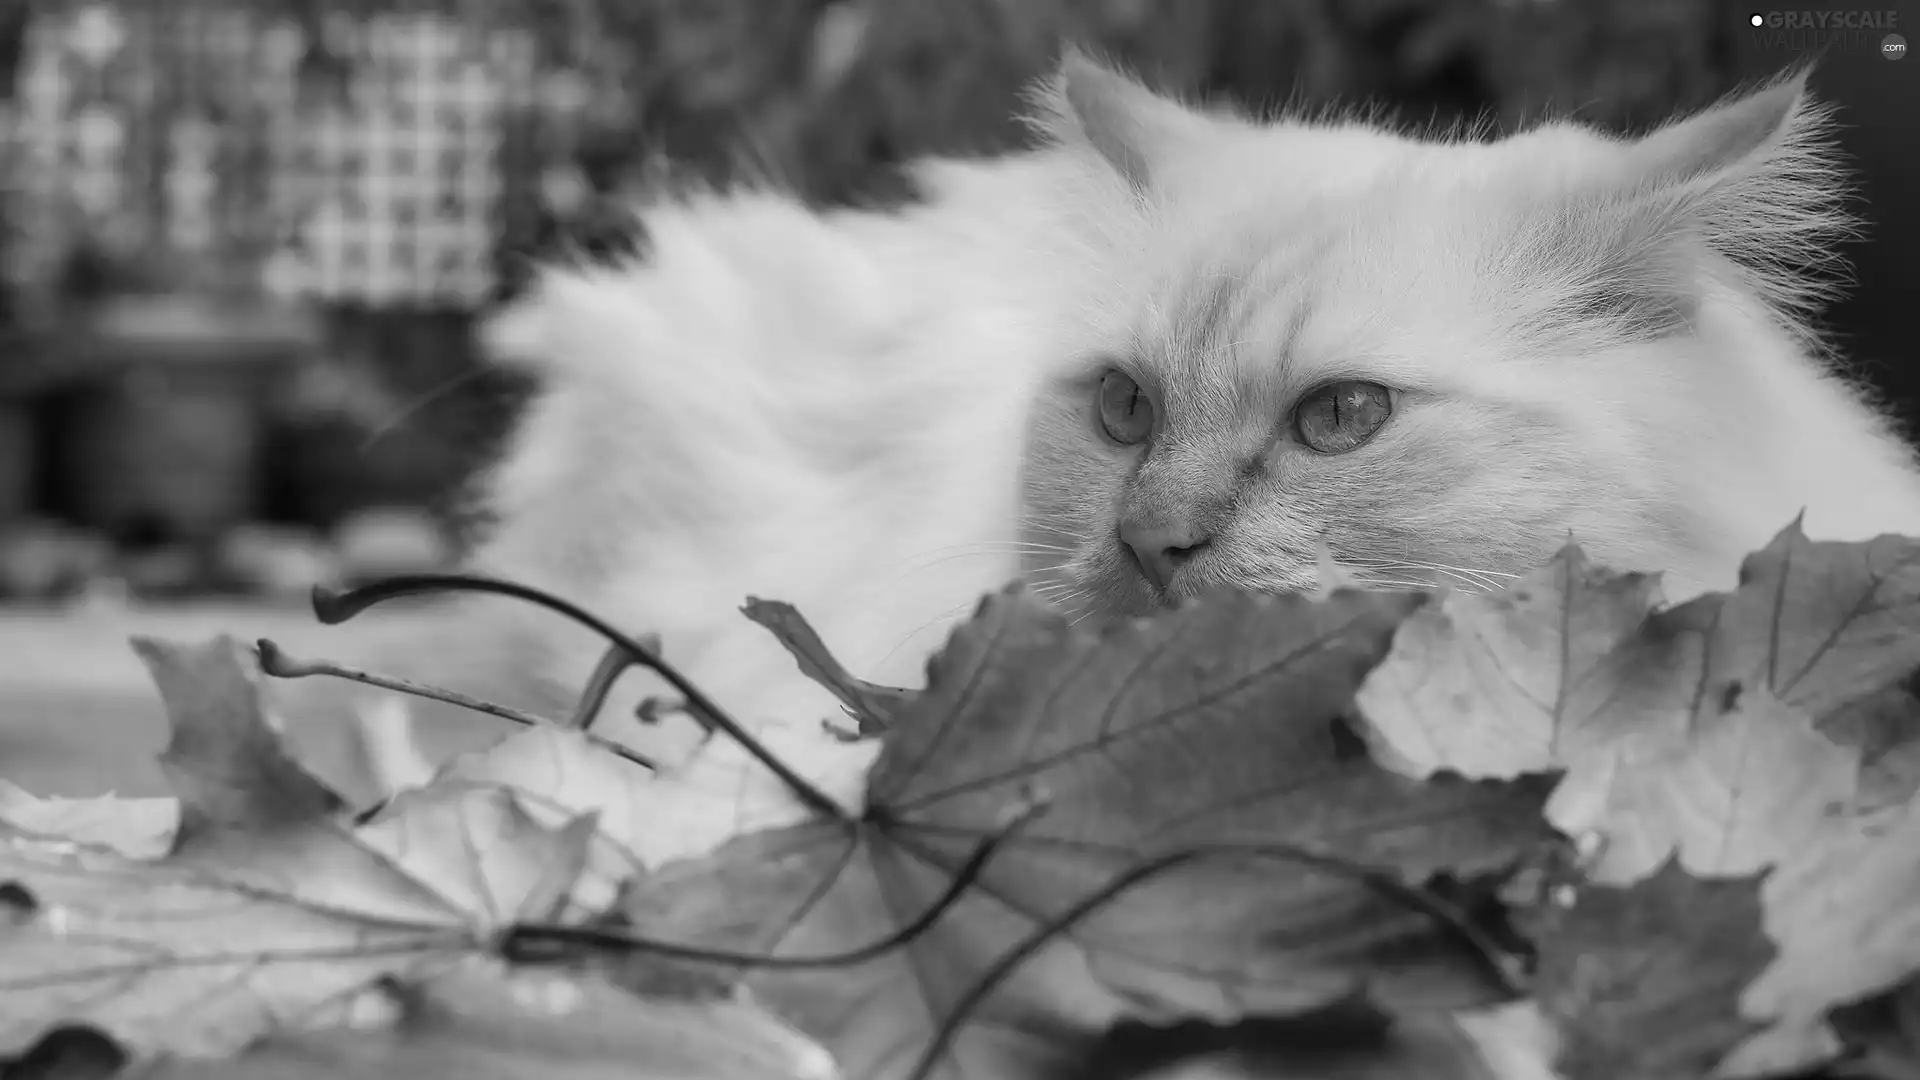 Leaf, white and red, cat